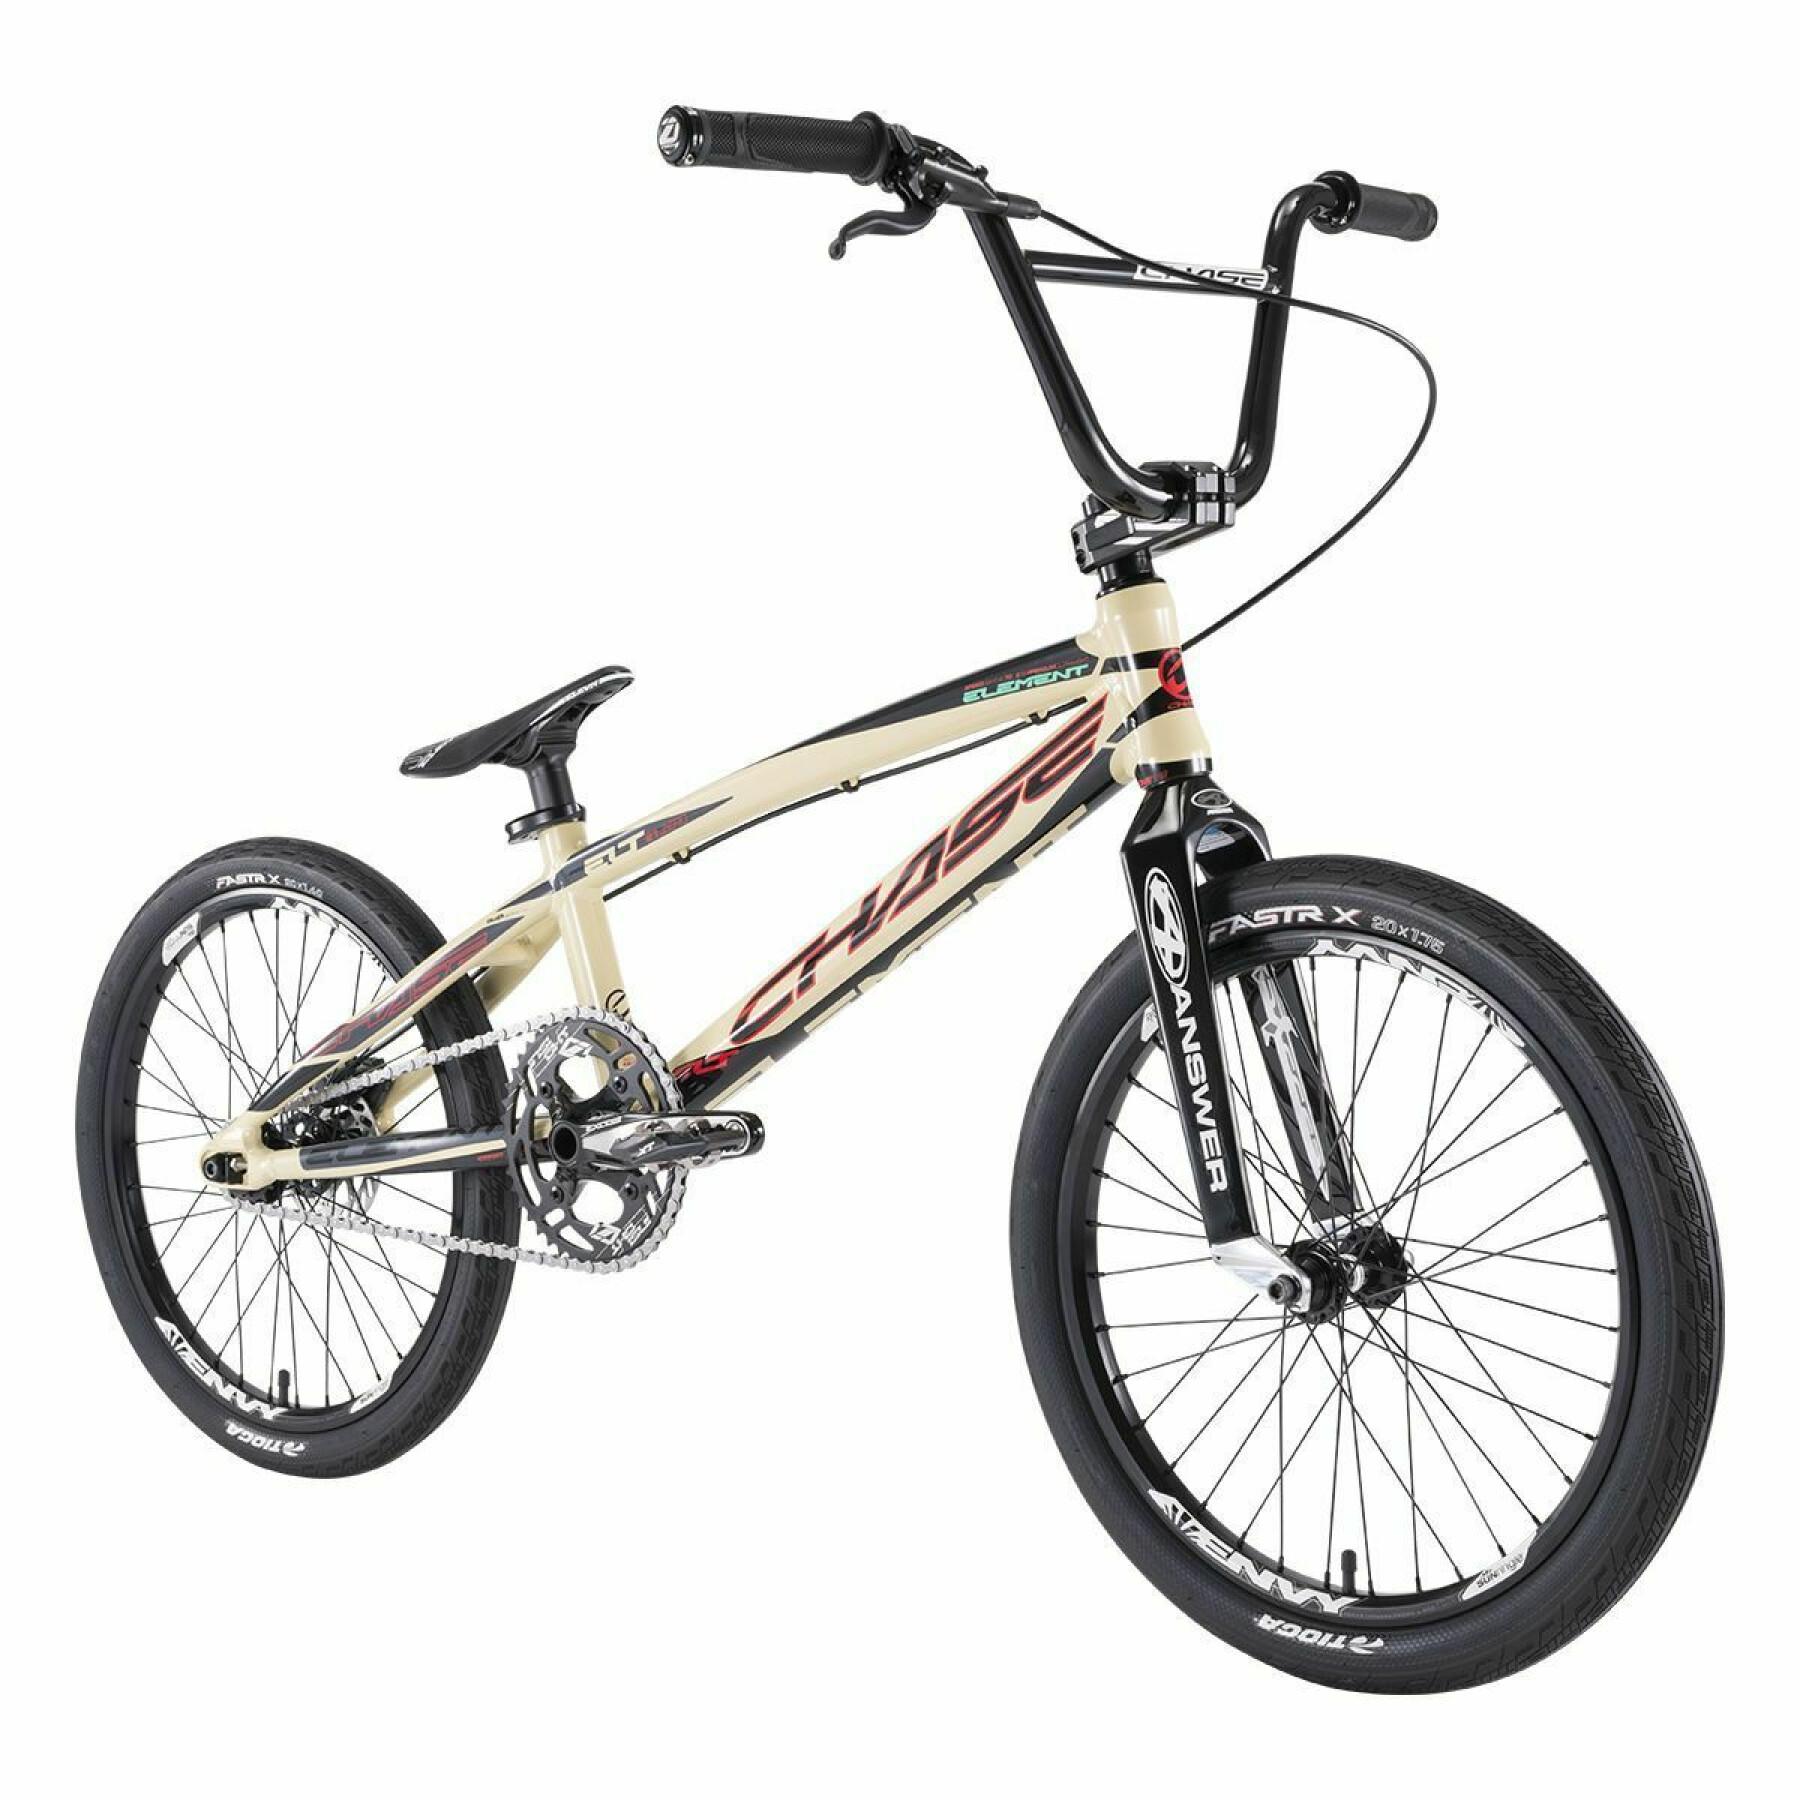 Fiets Chase element 2021 Pro XL